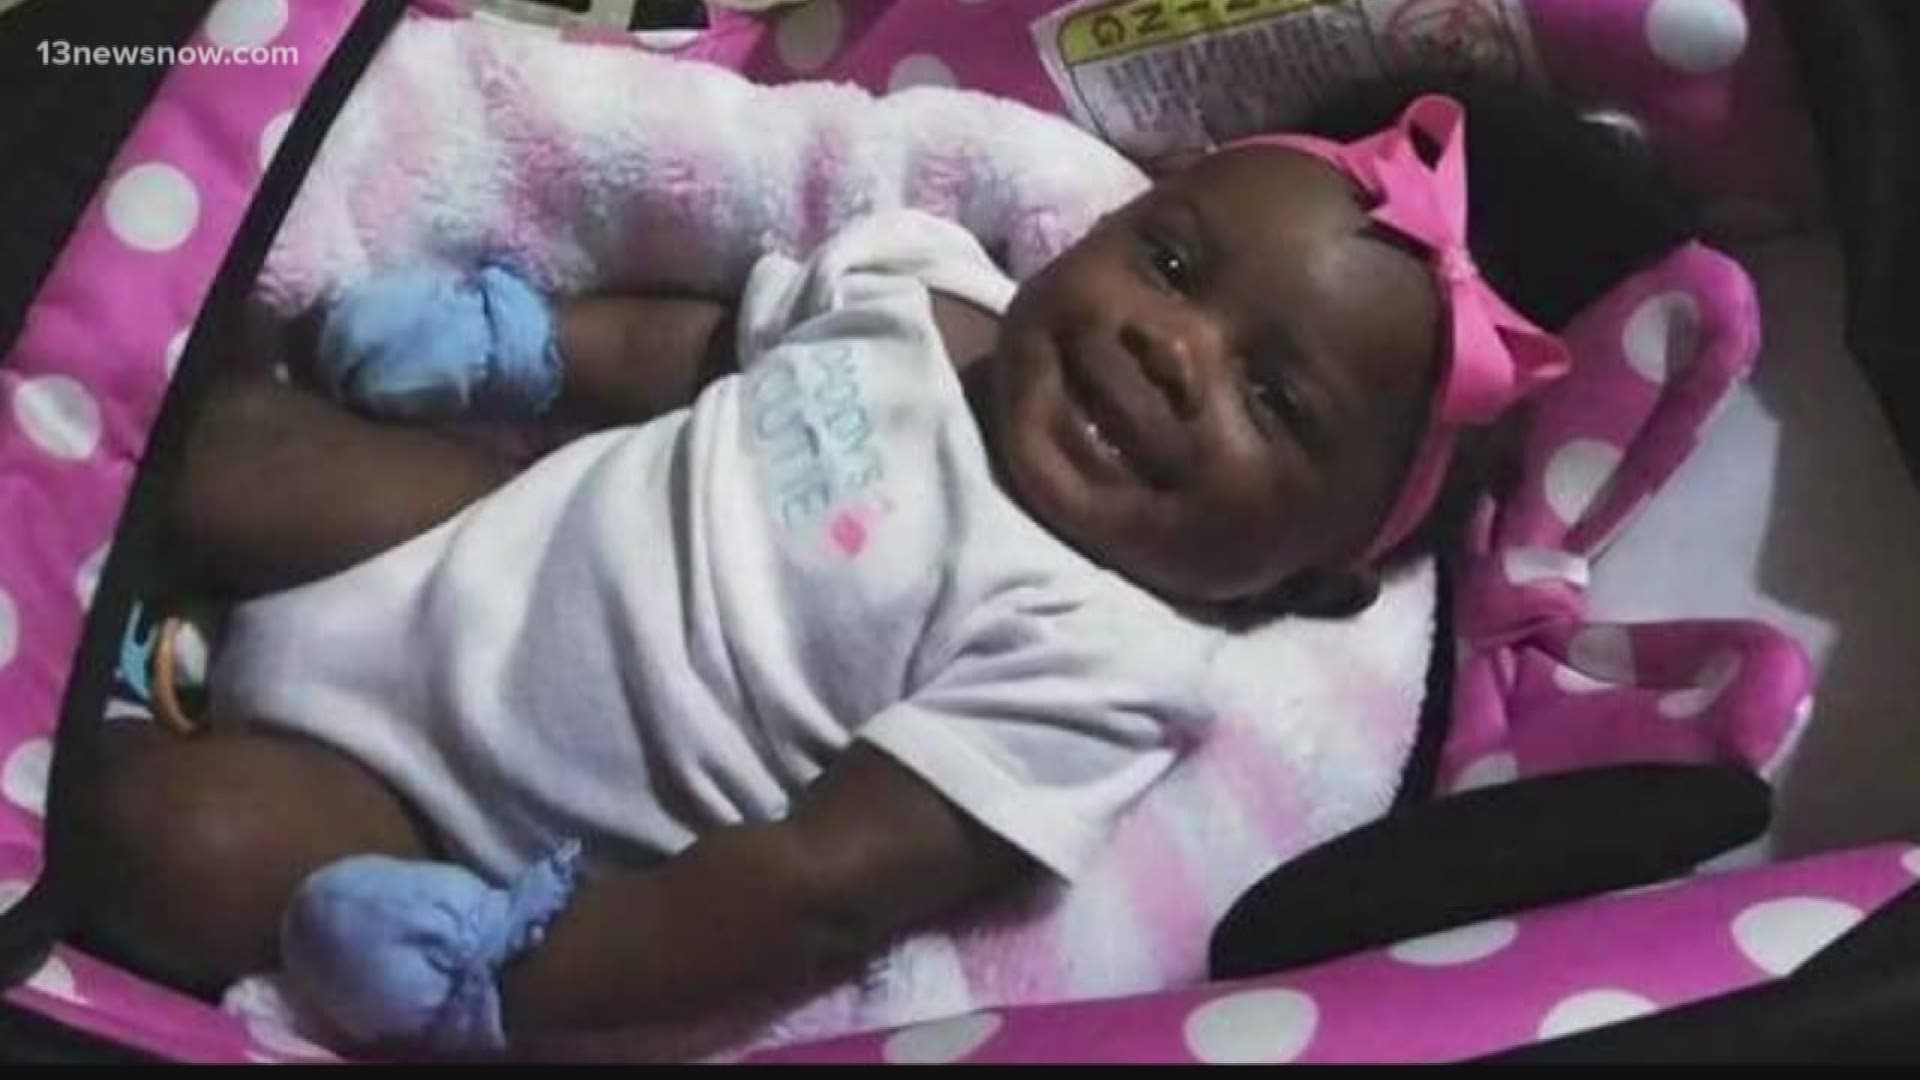 A 9-month-old was allegedly killed by the hands of her own father.